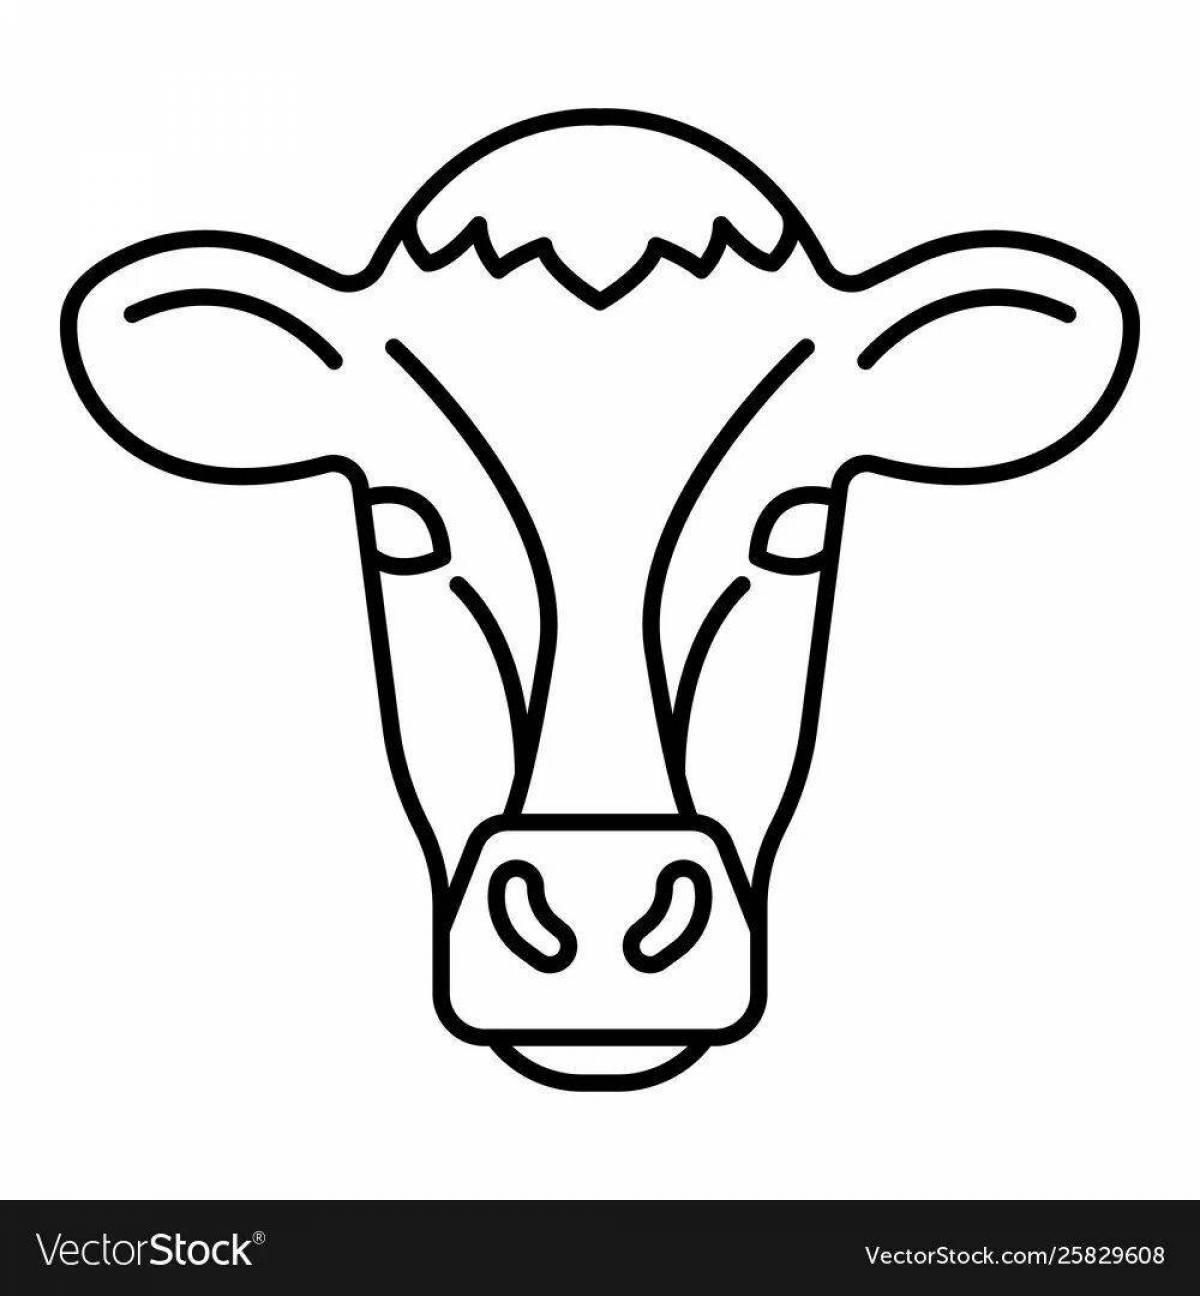 Fancy cow head coloring page